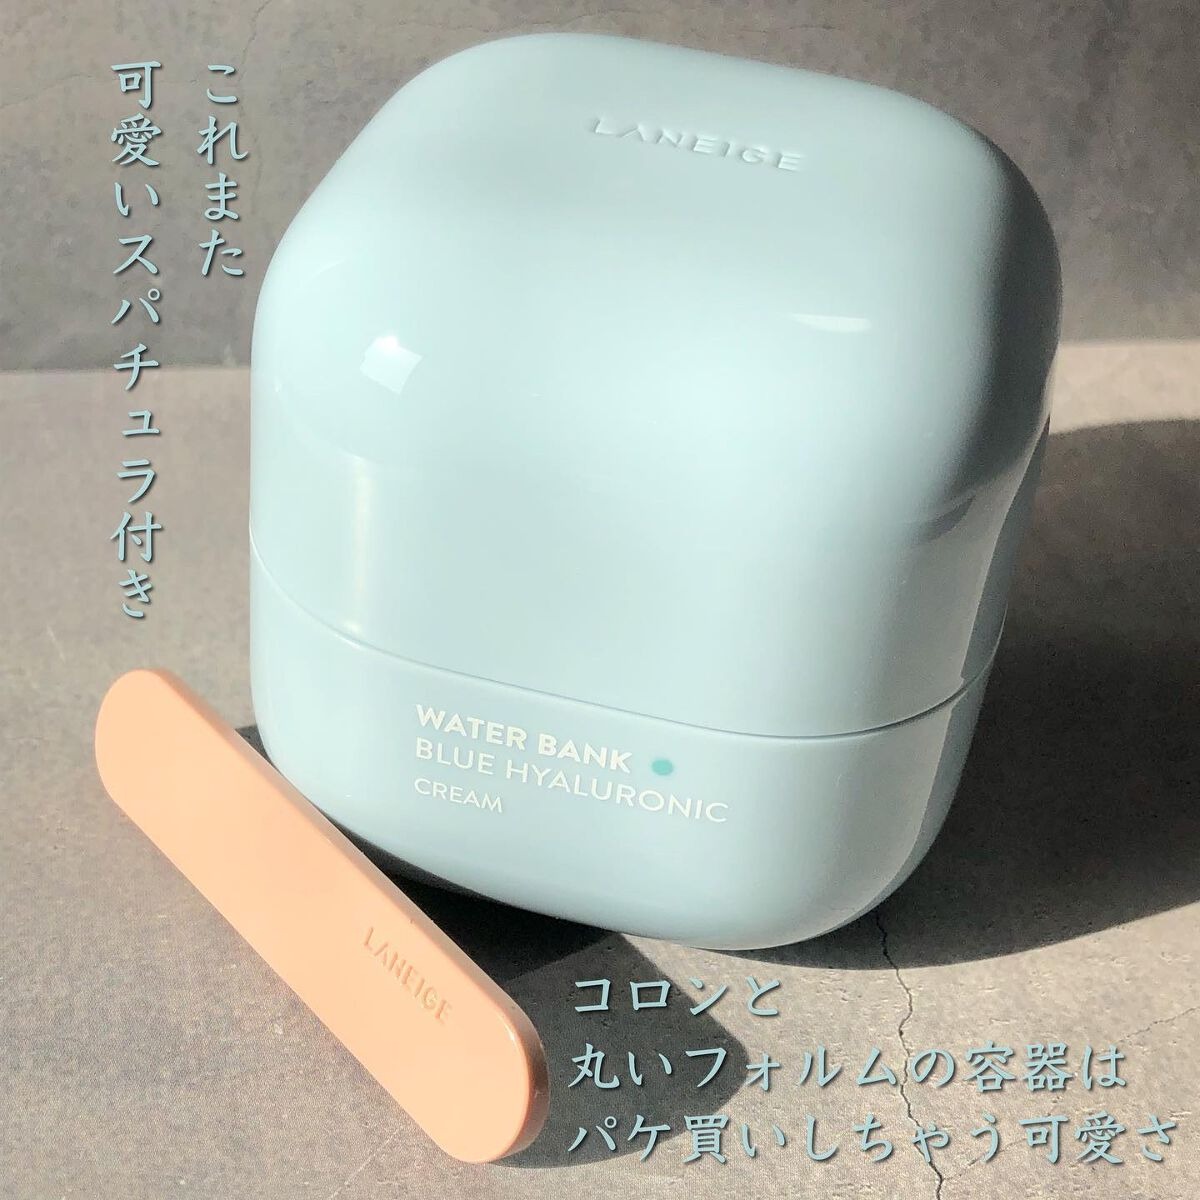 review kem duong laneige water bank blue hyaluronic cream for combination to oily 50ml